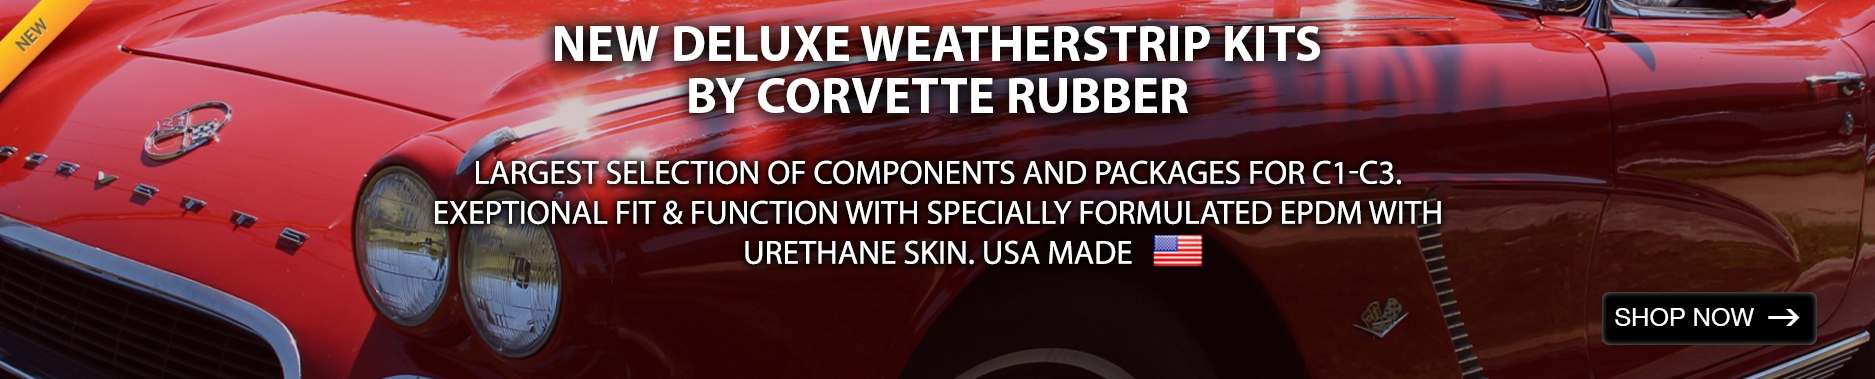 Deluxe Weatherstrip Kits by Corvette Rubber for C1-C3